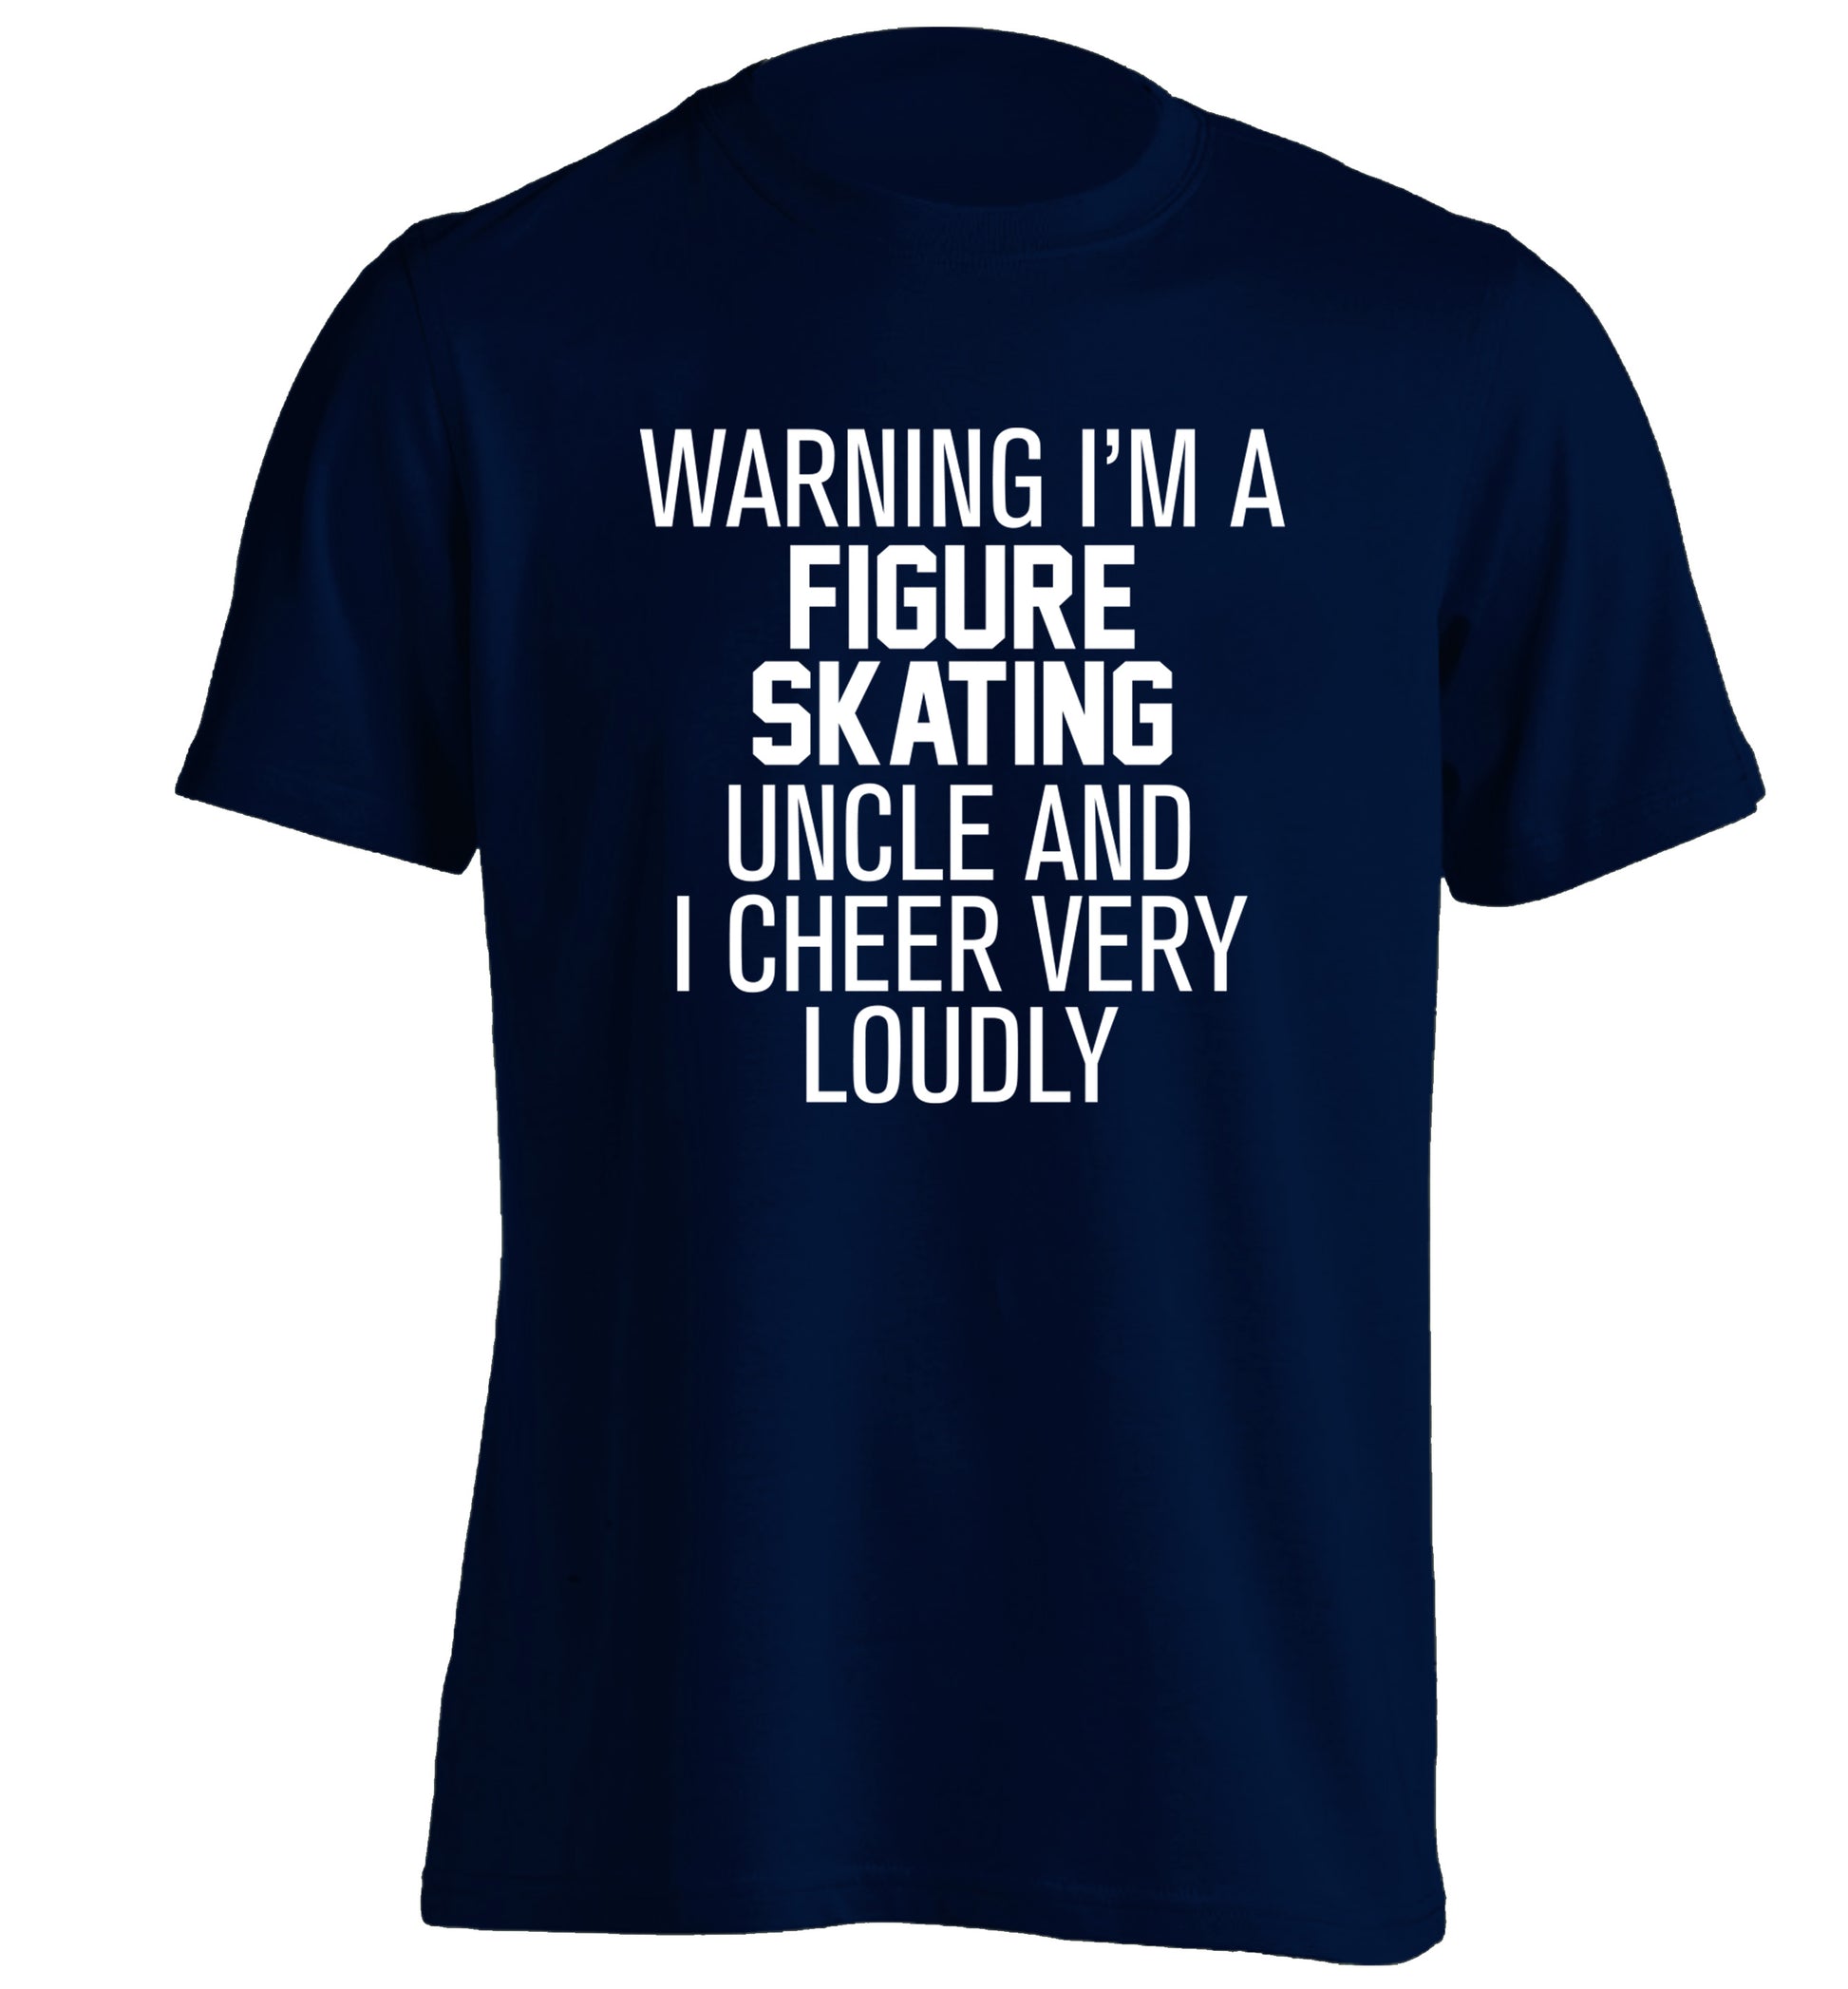 Warning I'm a figure skating uncle and I cheer very loudly adults unisexnavy Tshirt 2XL